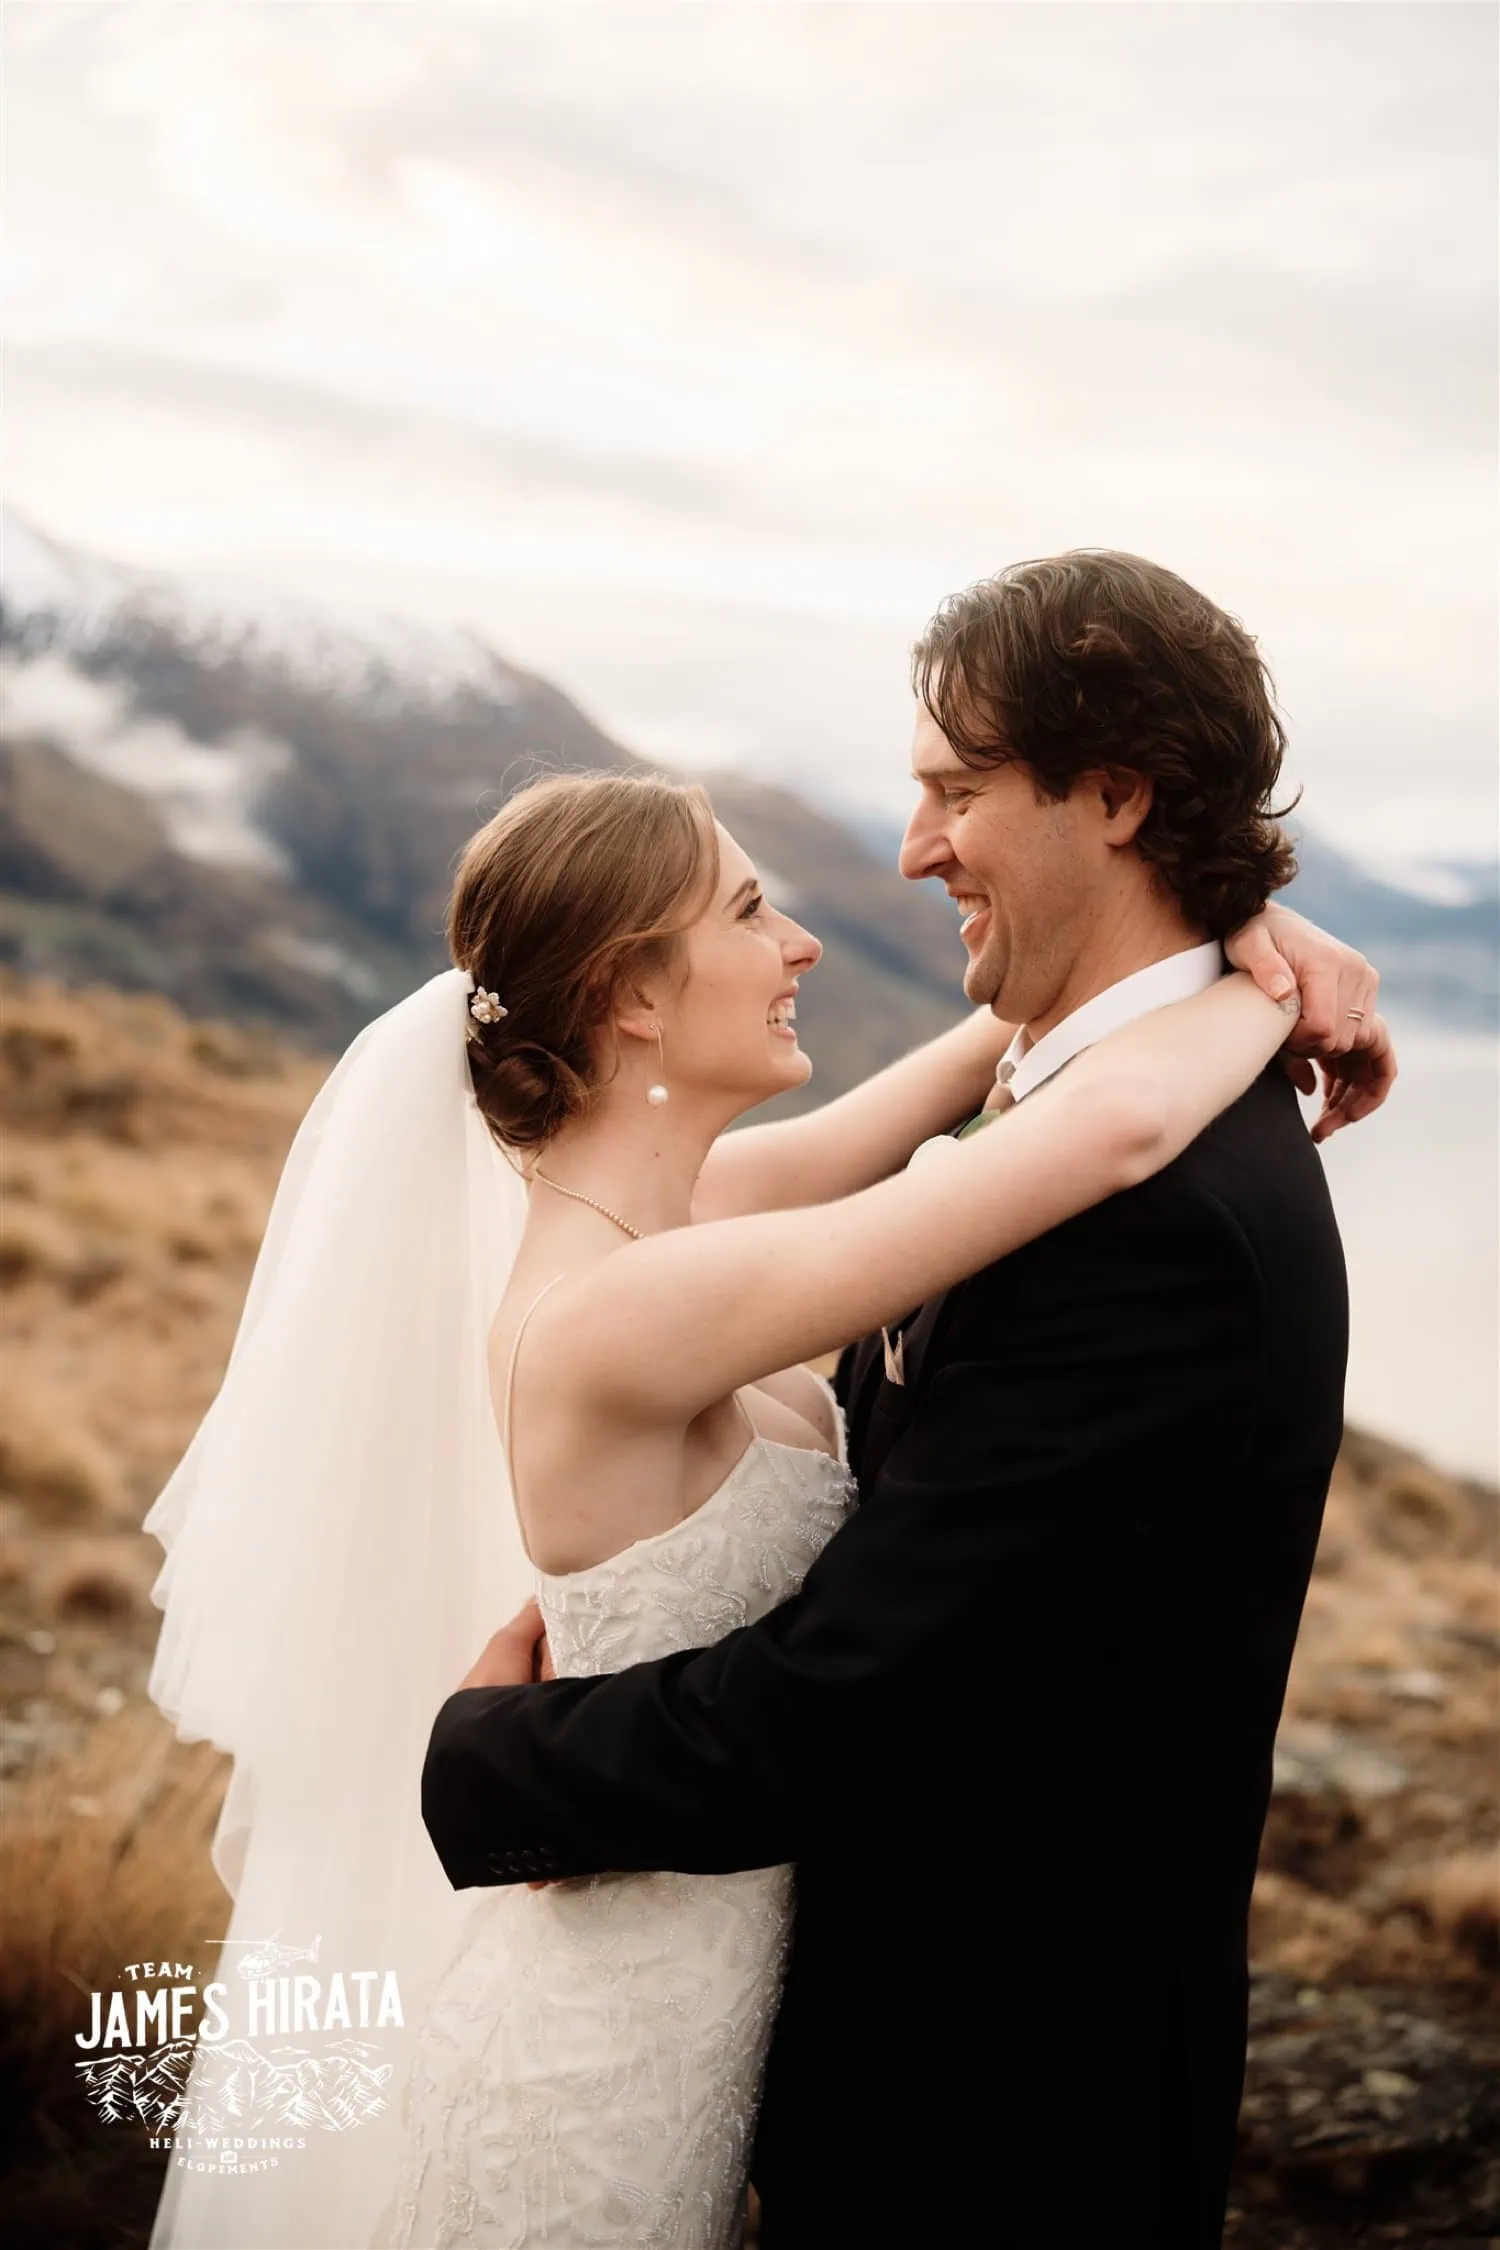 Hannah and Ross embrace during their elopement wedding atop the Bayonet Peaks